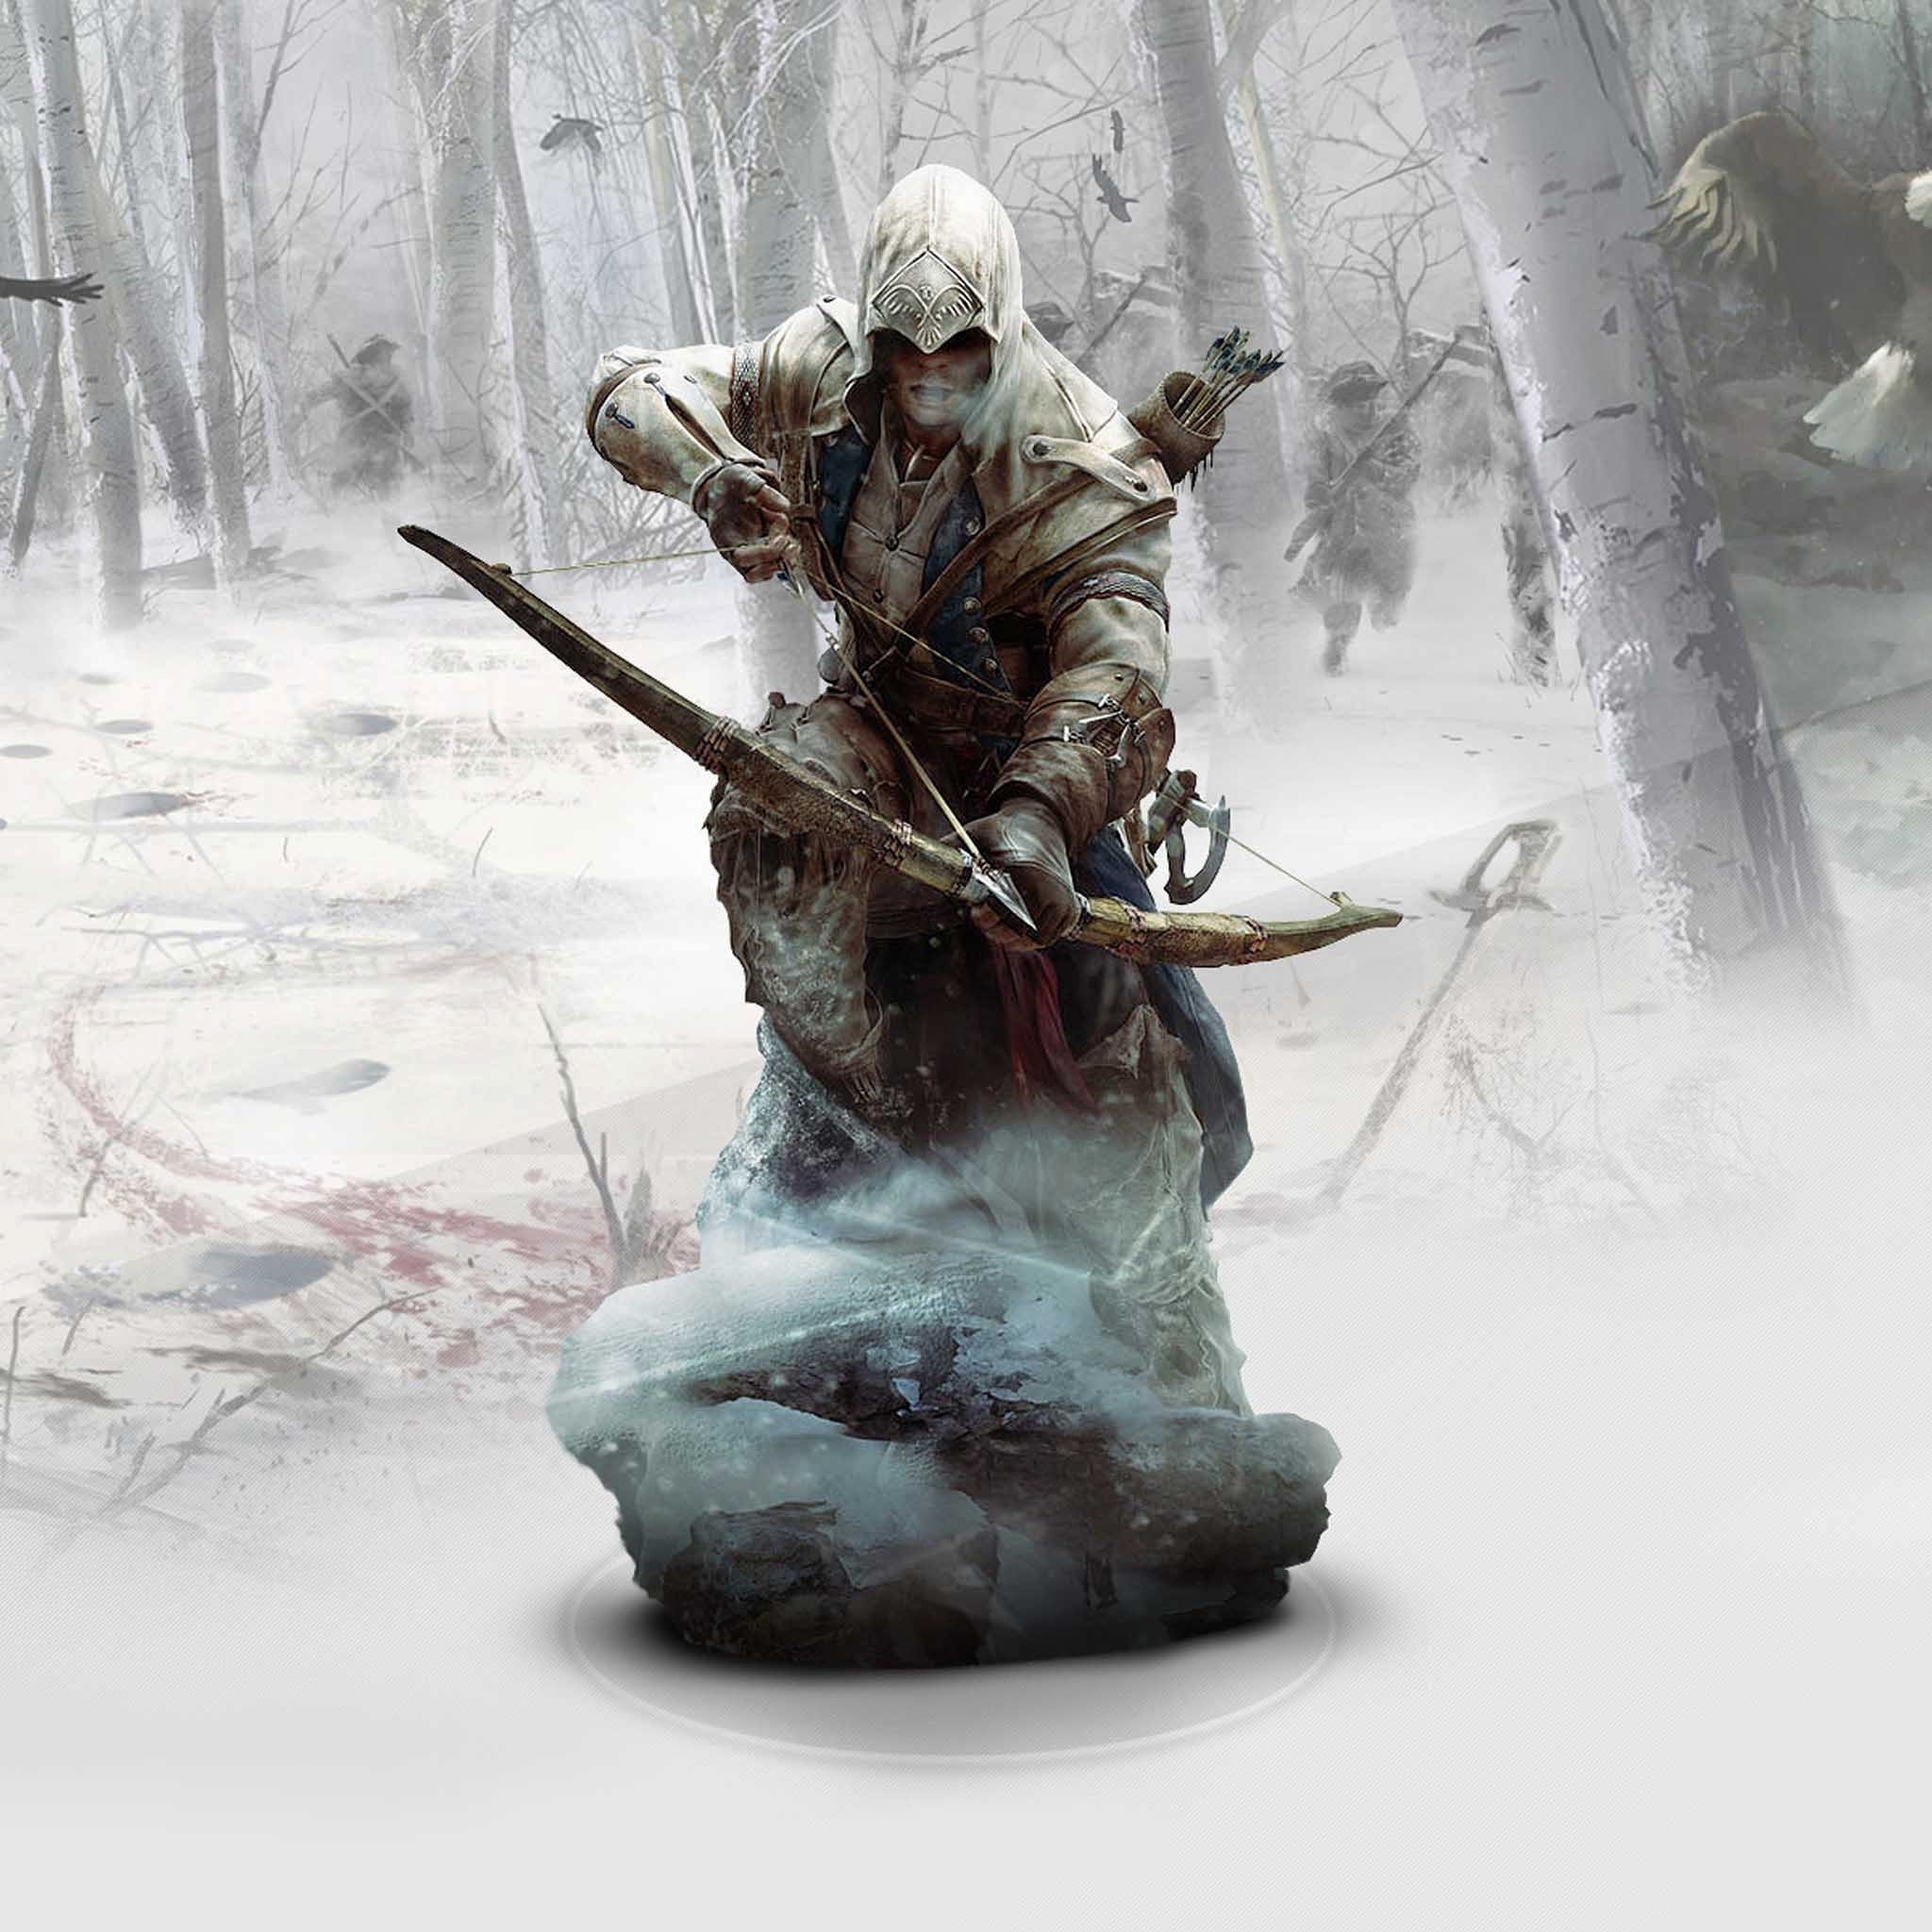 Assassins Creed 3, Connor Kenway, Freedom Wallpaper